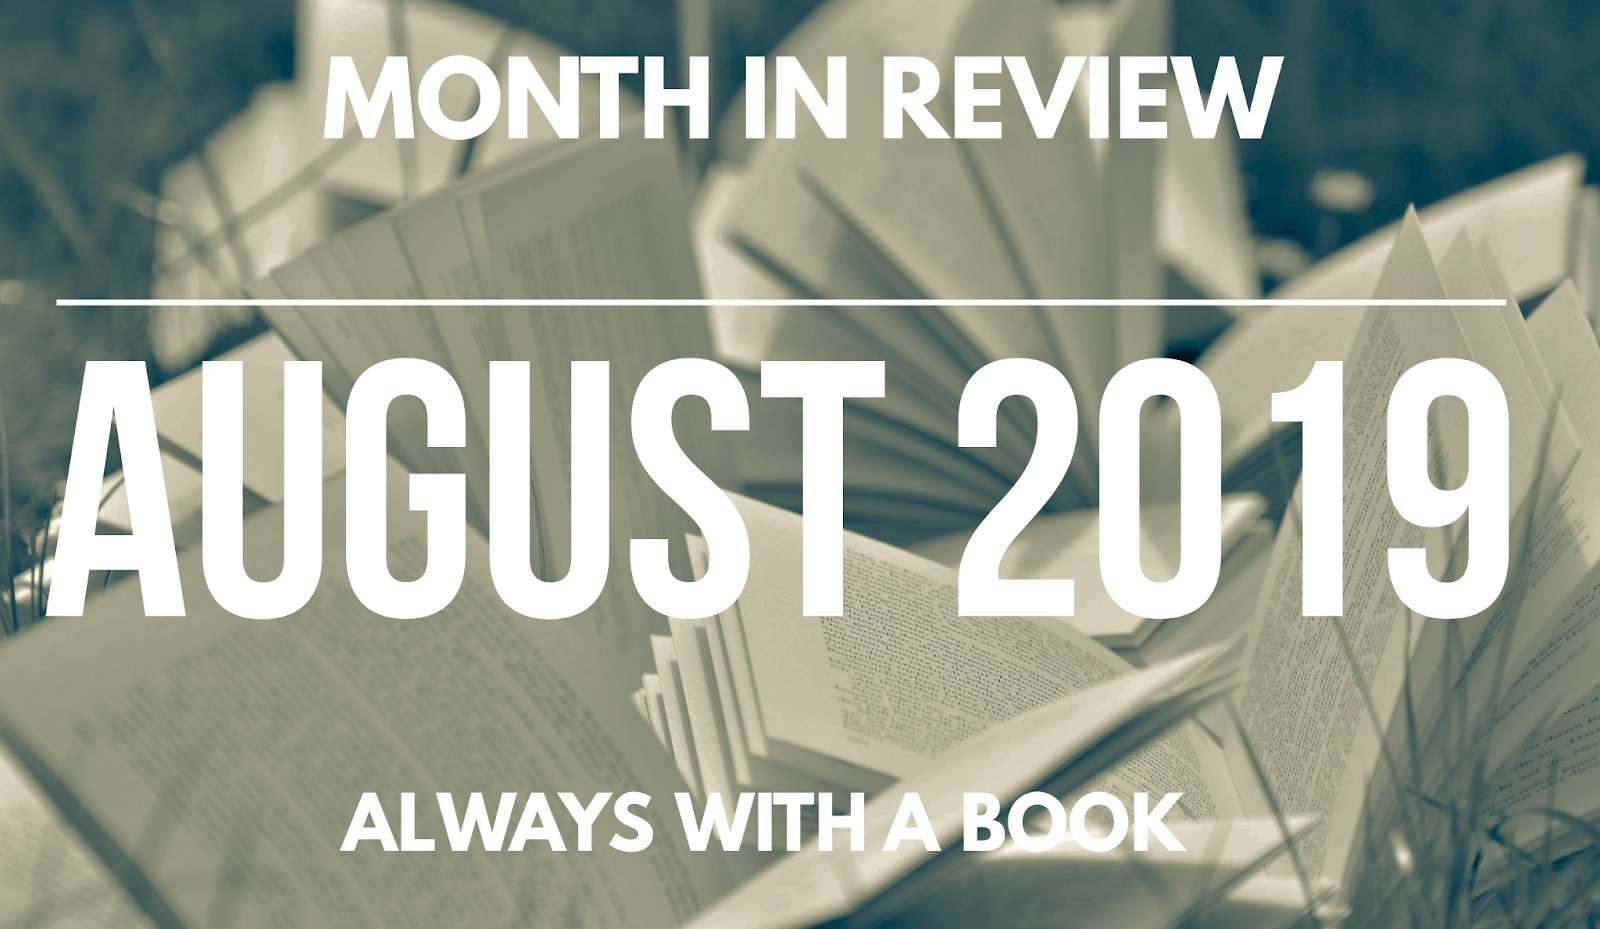 Month in Review: August 2019